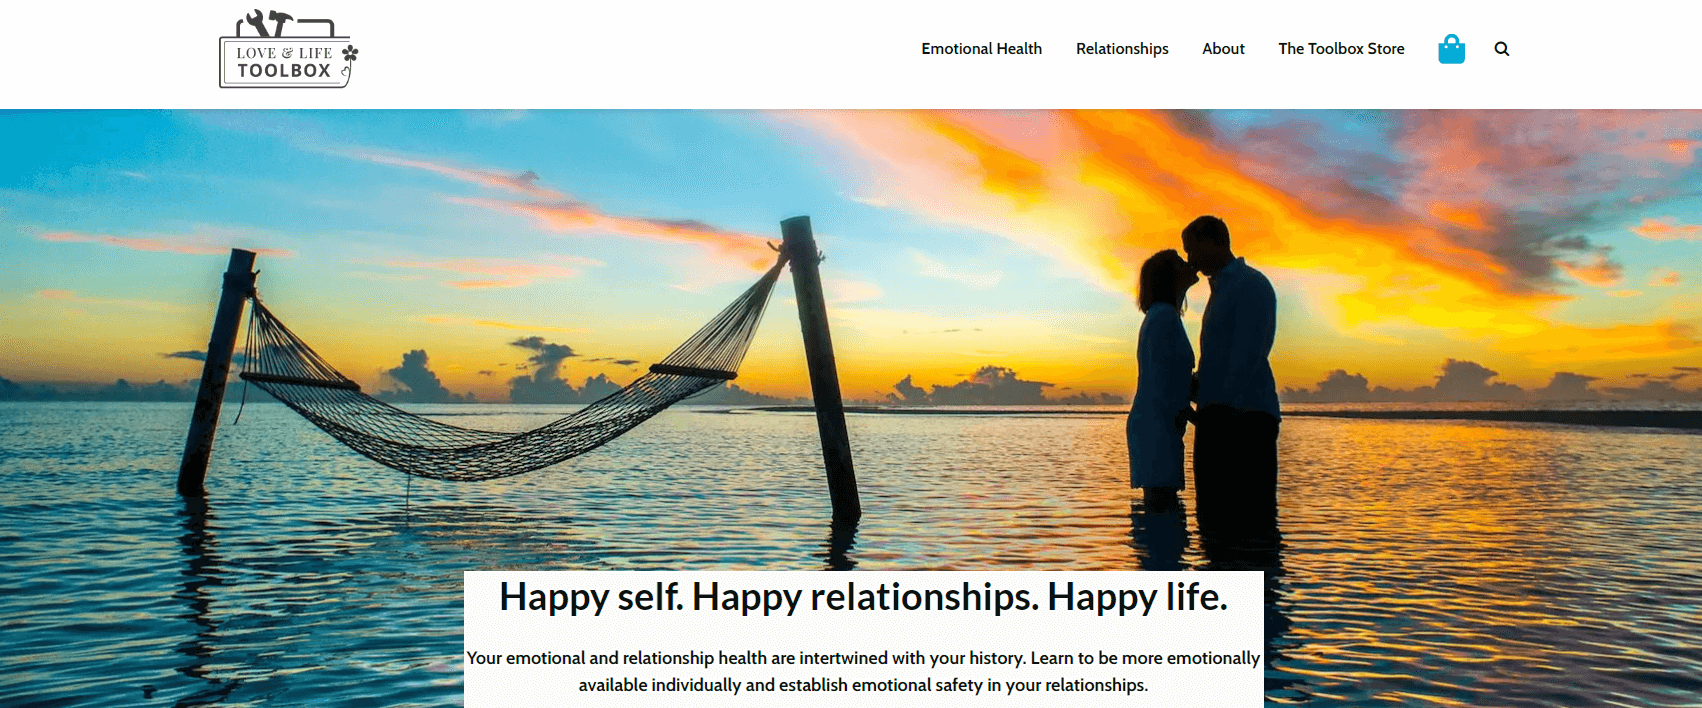 Love and Life Toolbox is one of the top blogs for love and relationship topics.